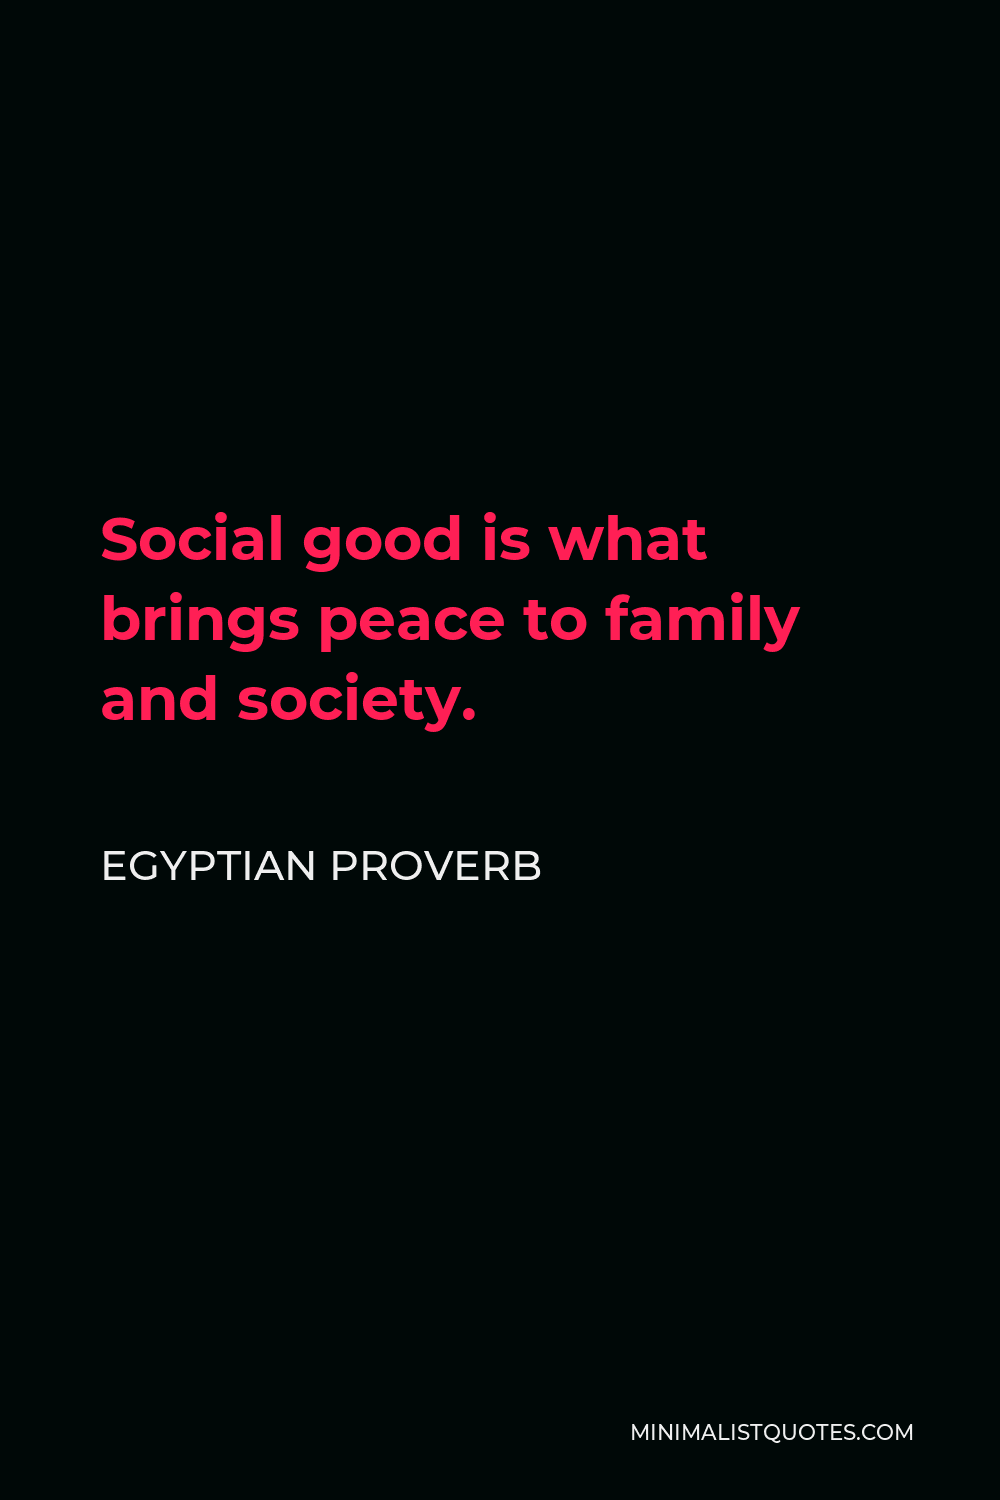 Egyptian Proverb Quote - Social good is what brings peace to family and society.